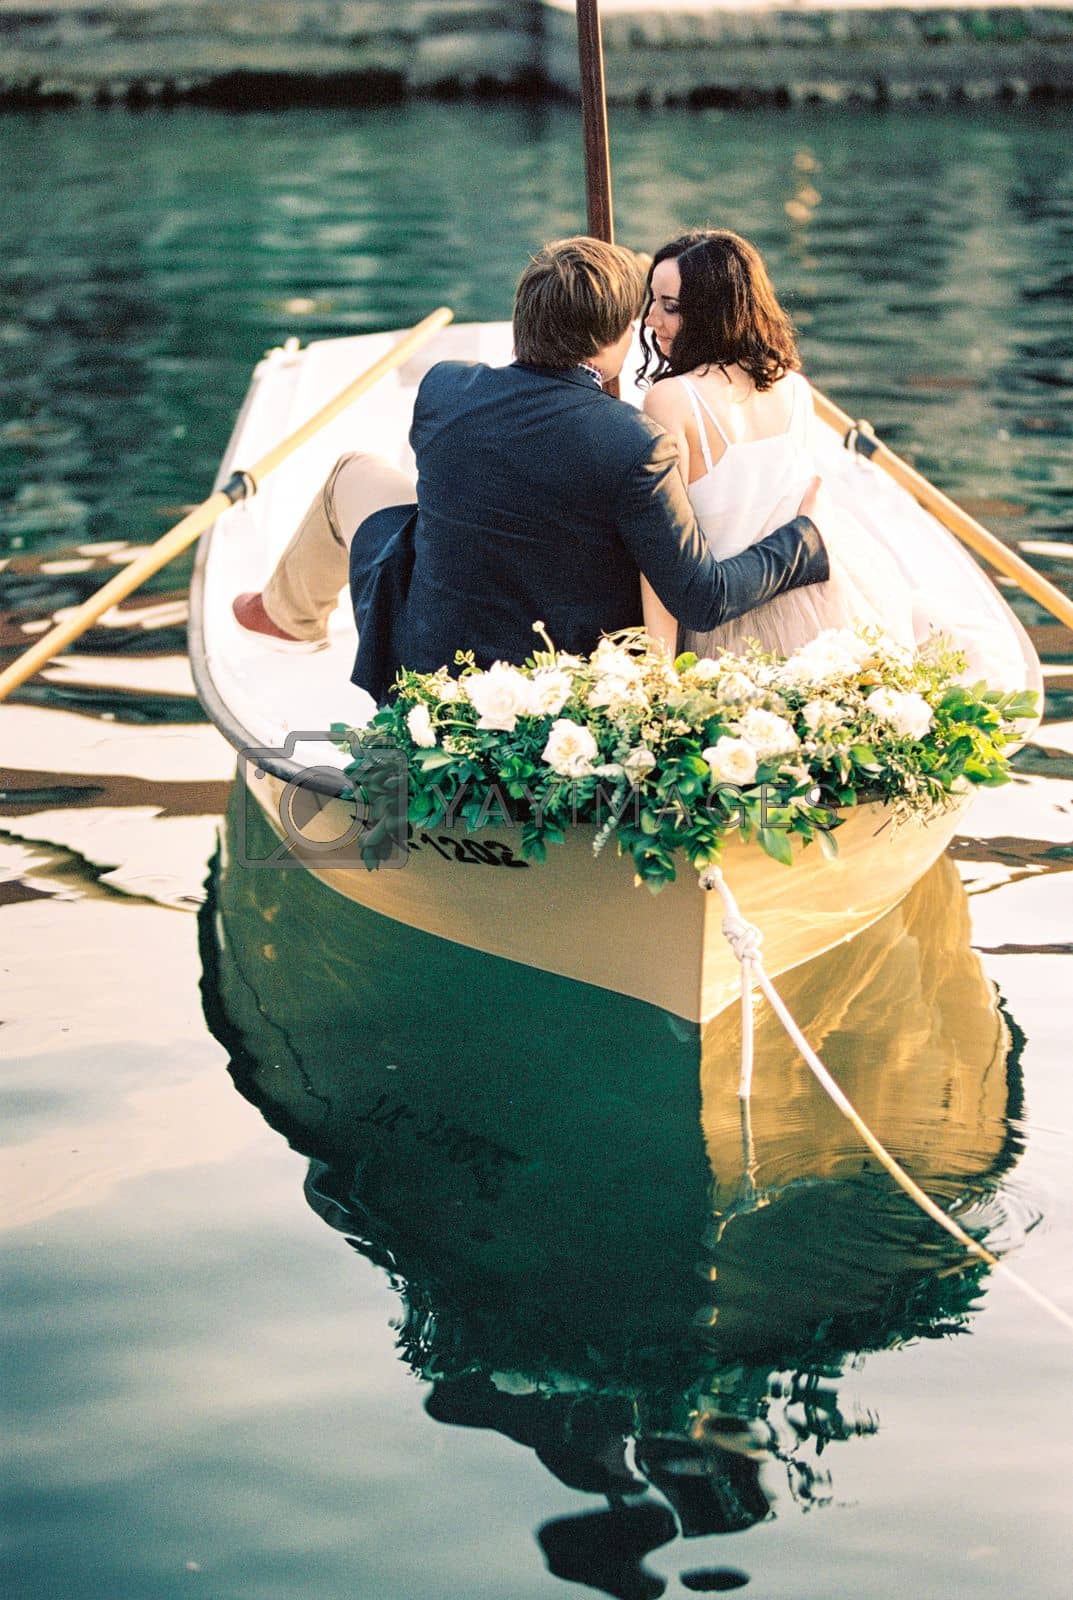 Royalty free image of Man and woman hug and almost kiss in a boat decorated with flowers by Nadtochiy